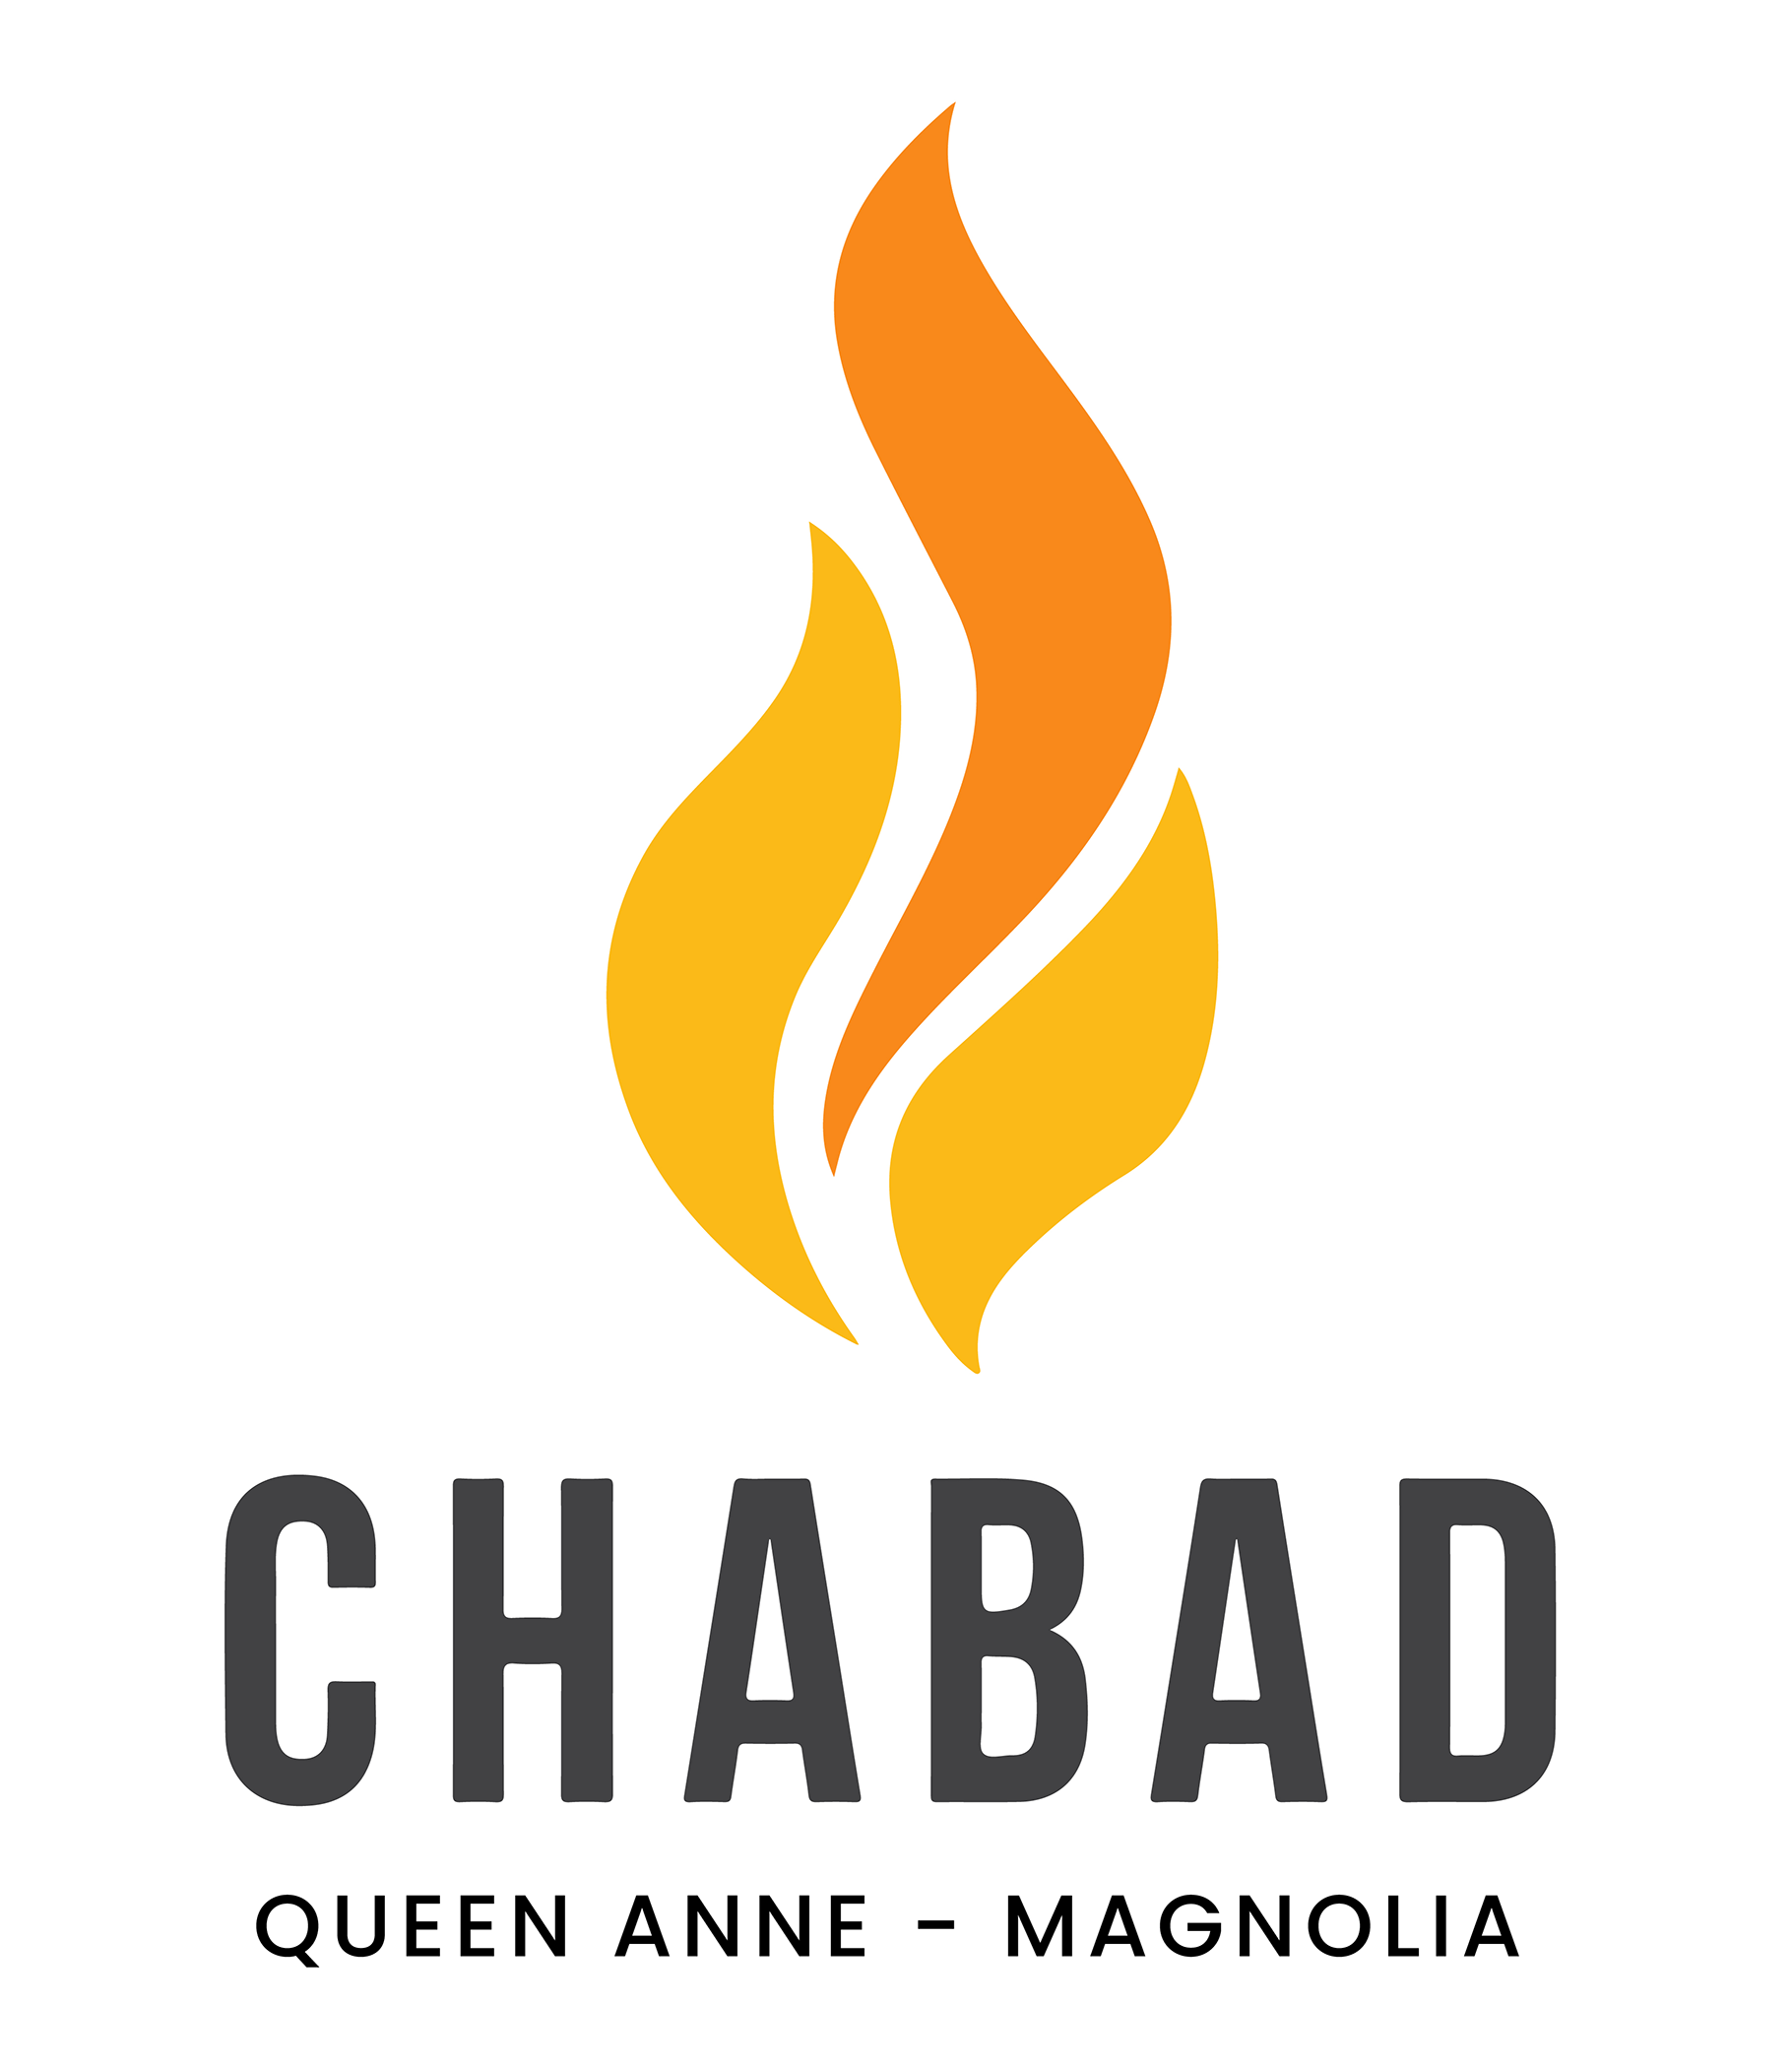 Chabad of Queen Anne - Magnolia